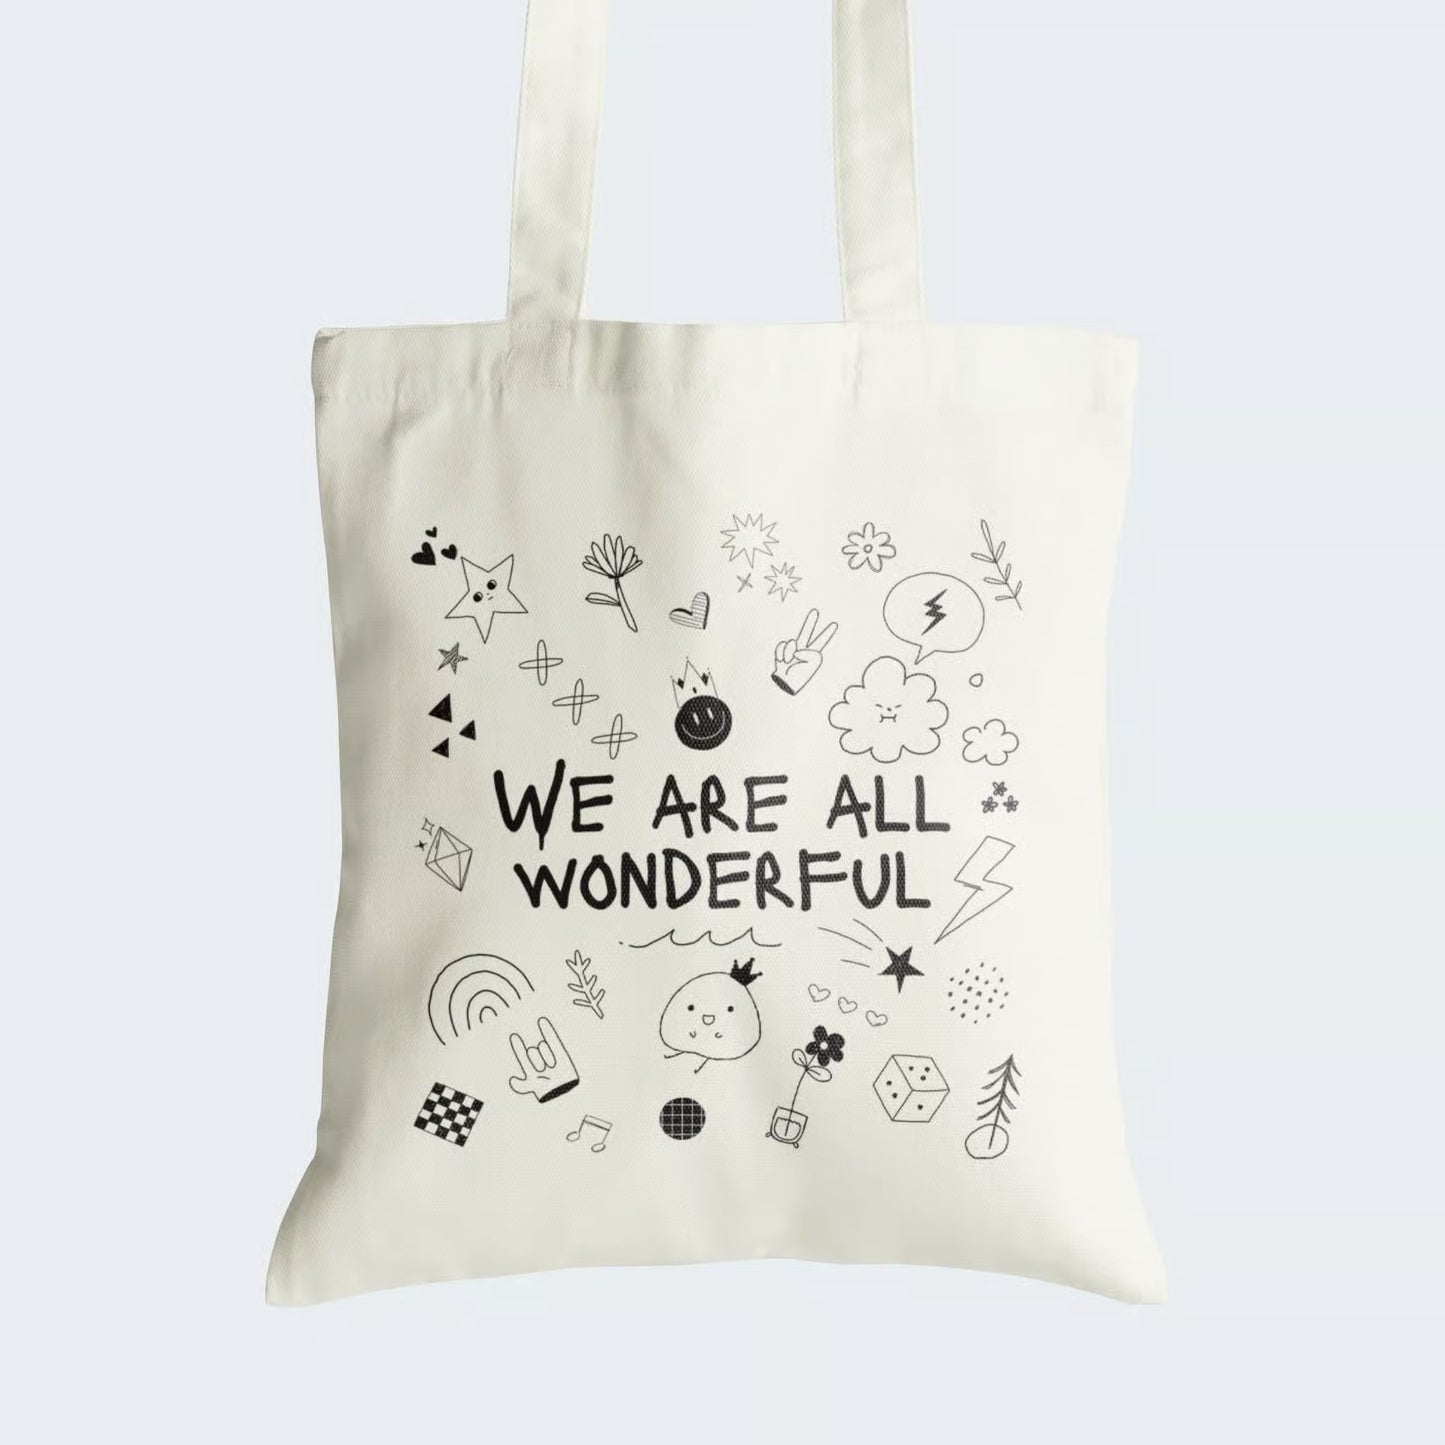 Elevate your style and embrace self-love with our "We Are All Wonderful" Cotton Canvas Tote Bag. This charming tote is adorned with adorable and childlike doodles, accompanied by the empowering caption "We Are All Wonderful." Crafted for both durability and style, it includes a secure zipper closure for daily convenience. Carry this heartwarming message of self-acceptance with our fashionable Cotton Canvas Tote Bag. Order yours today and celebrate your uniqueness!